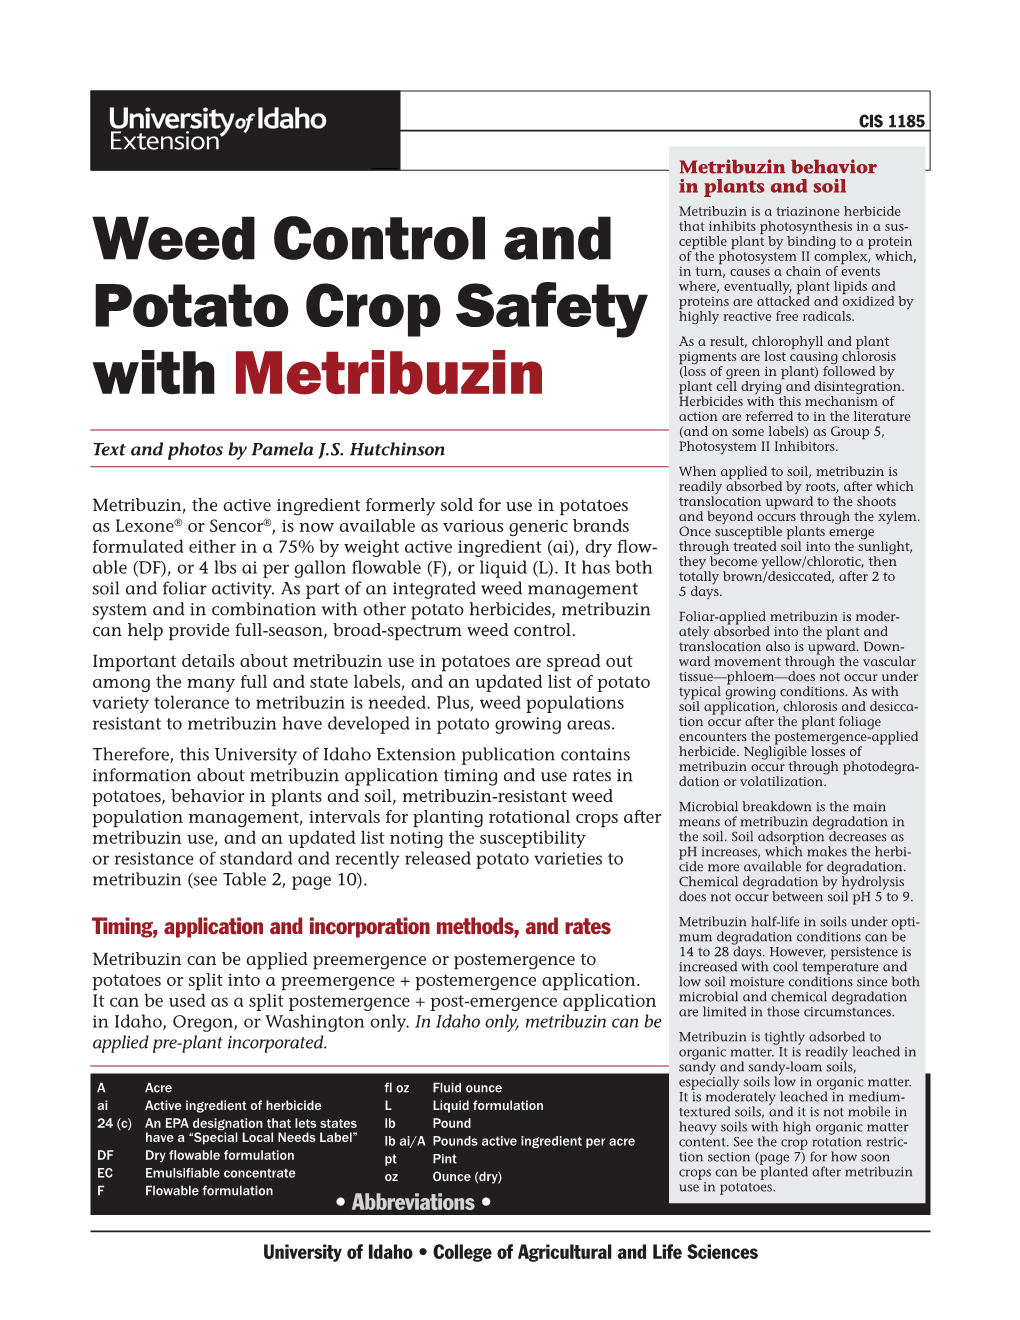 Weed Control and Potato Crop Safety with Metribuzin